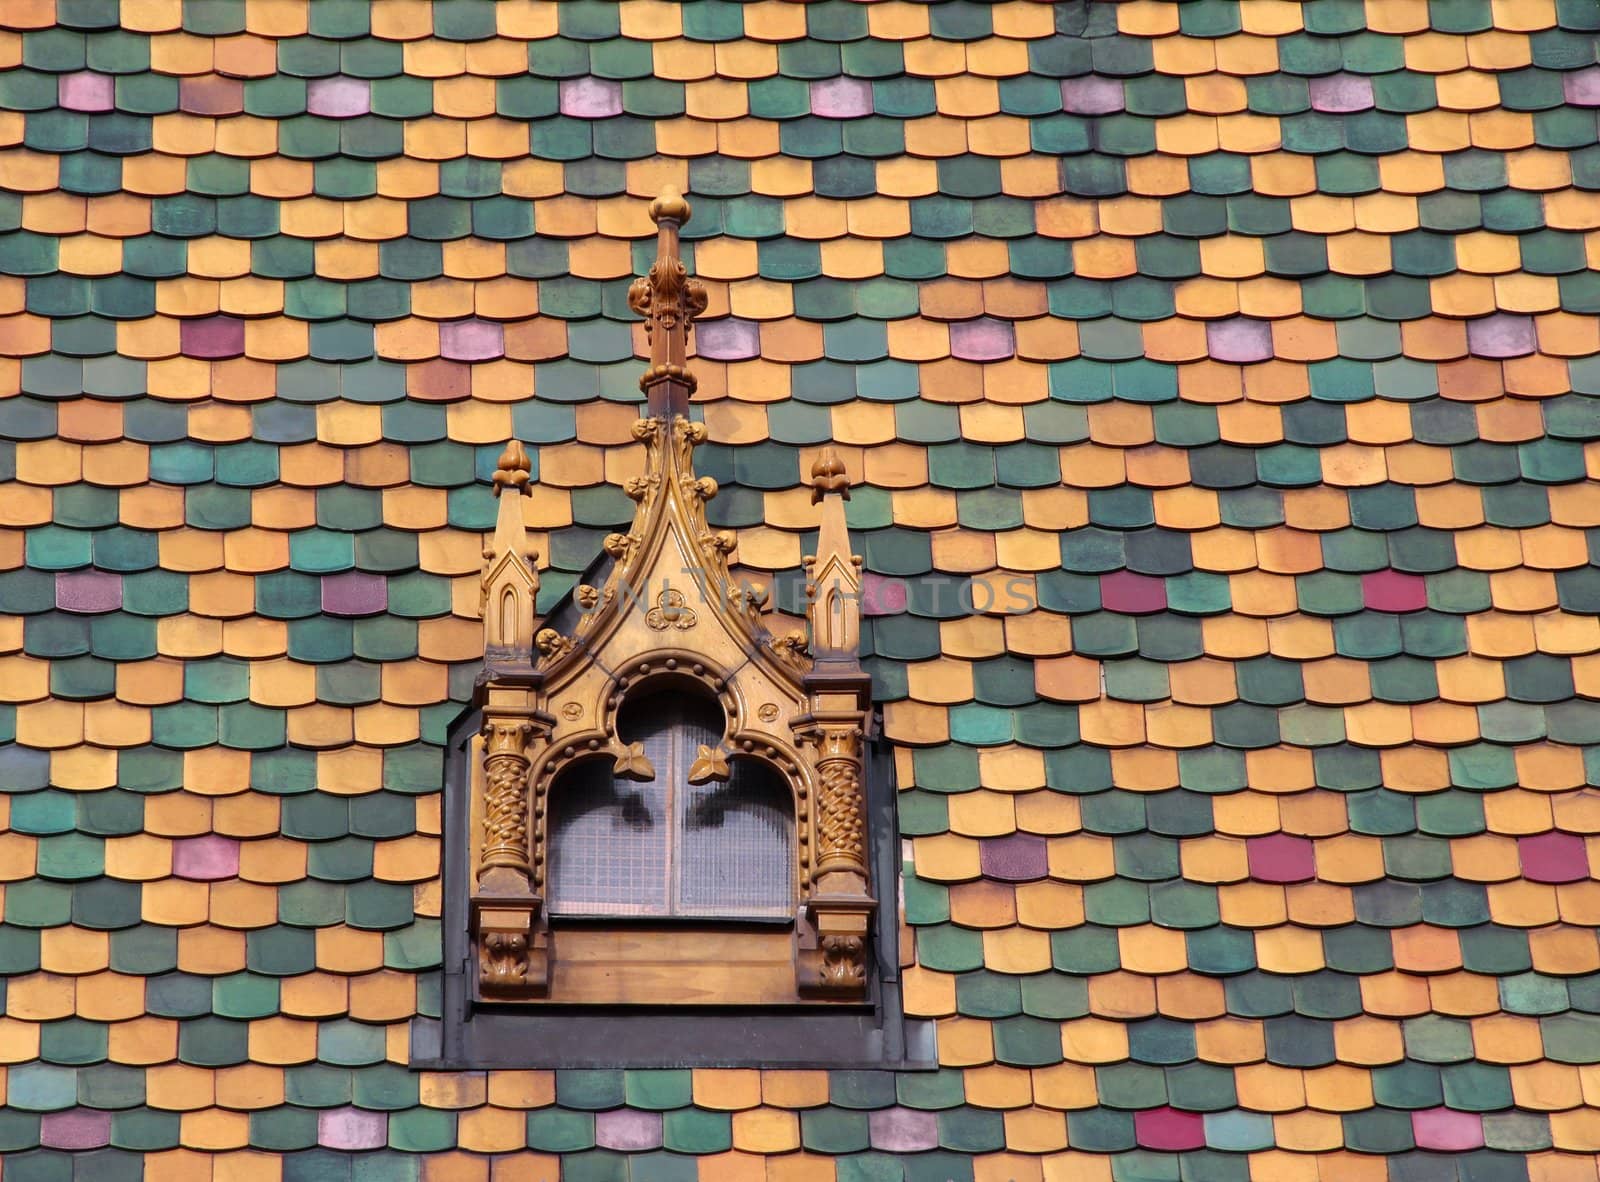 Ornamental roof tiles and roof windows.